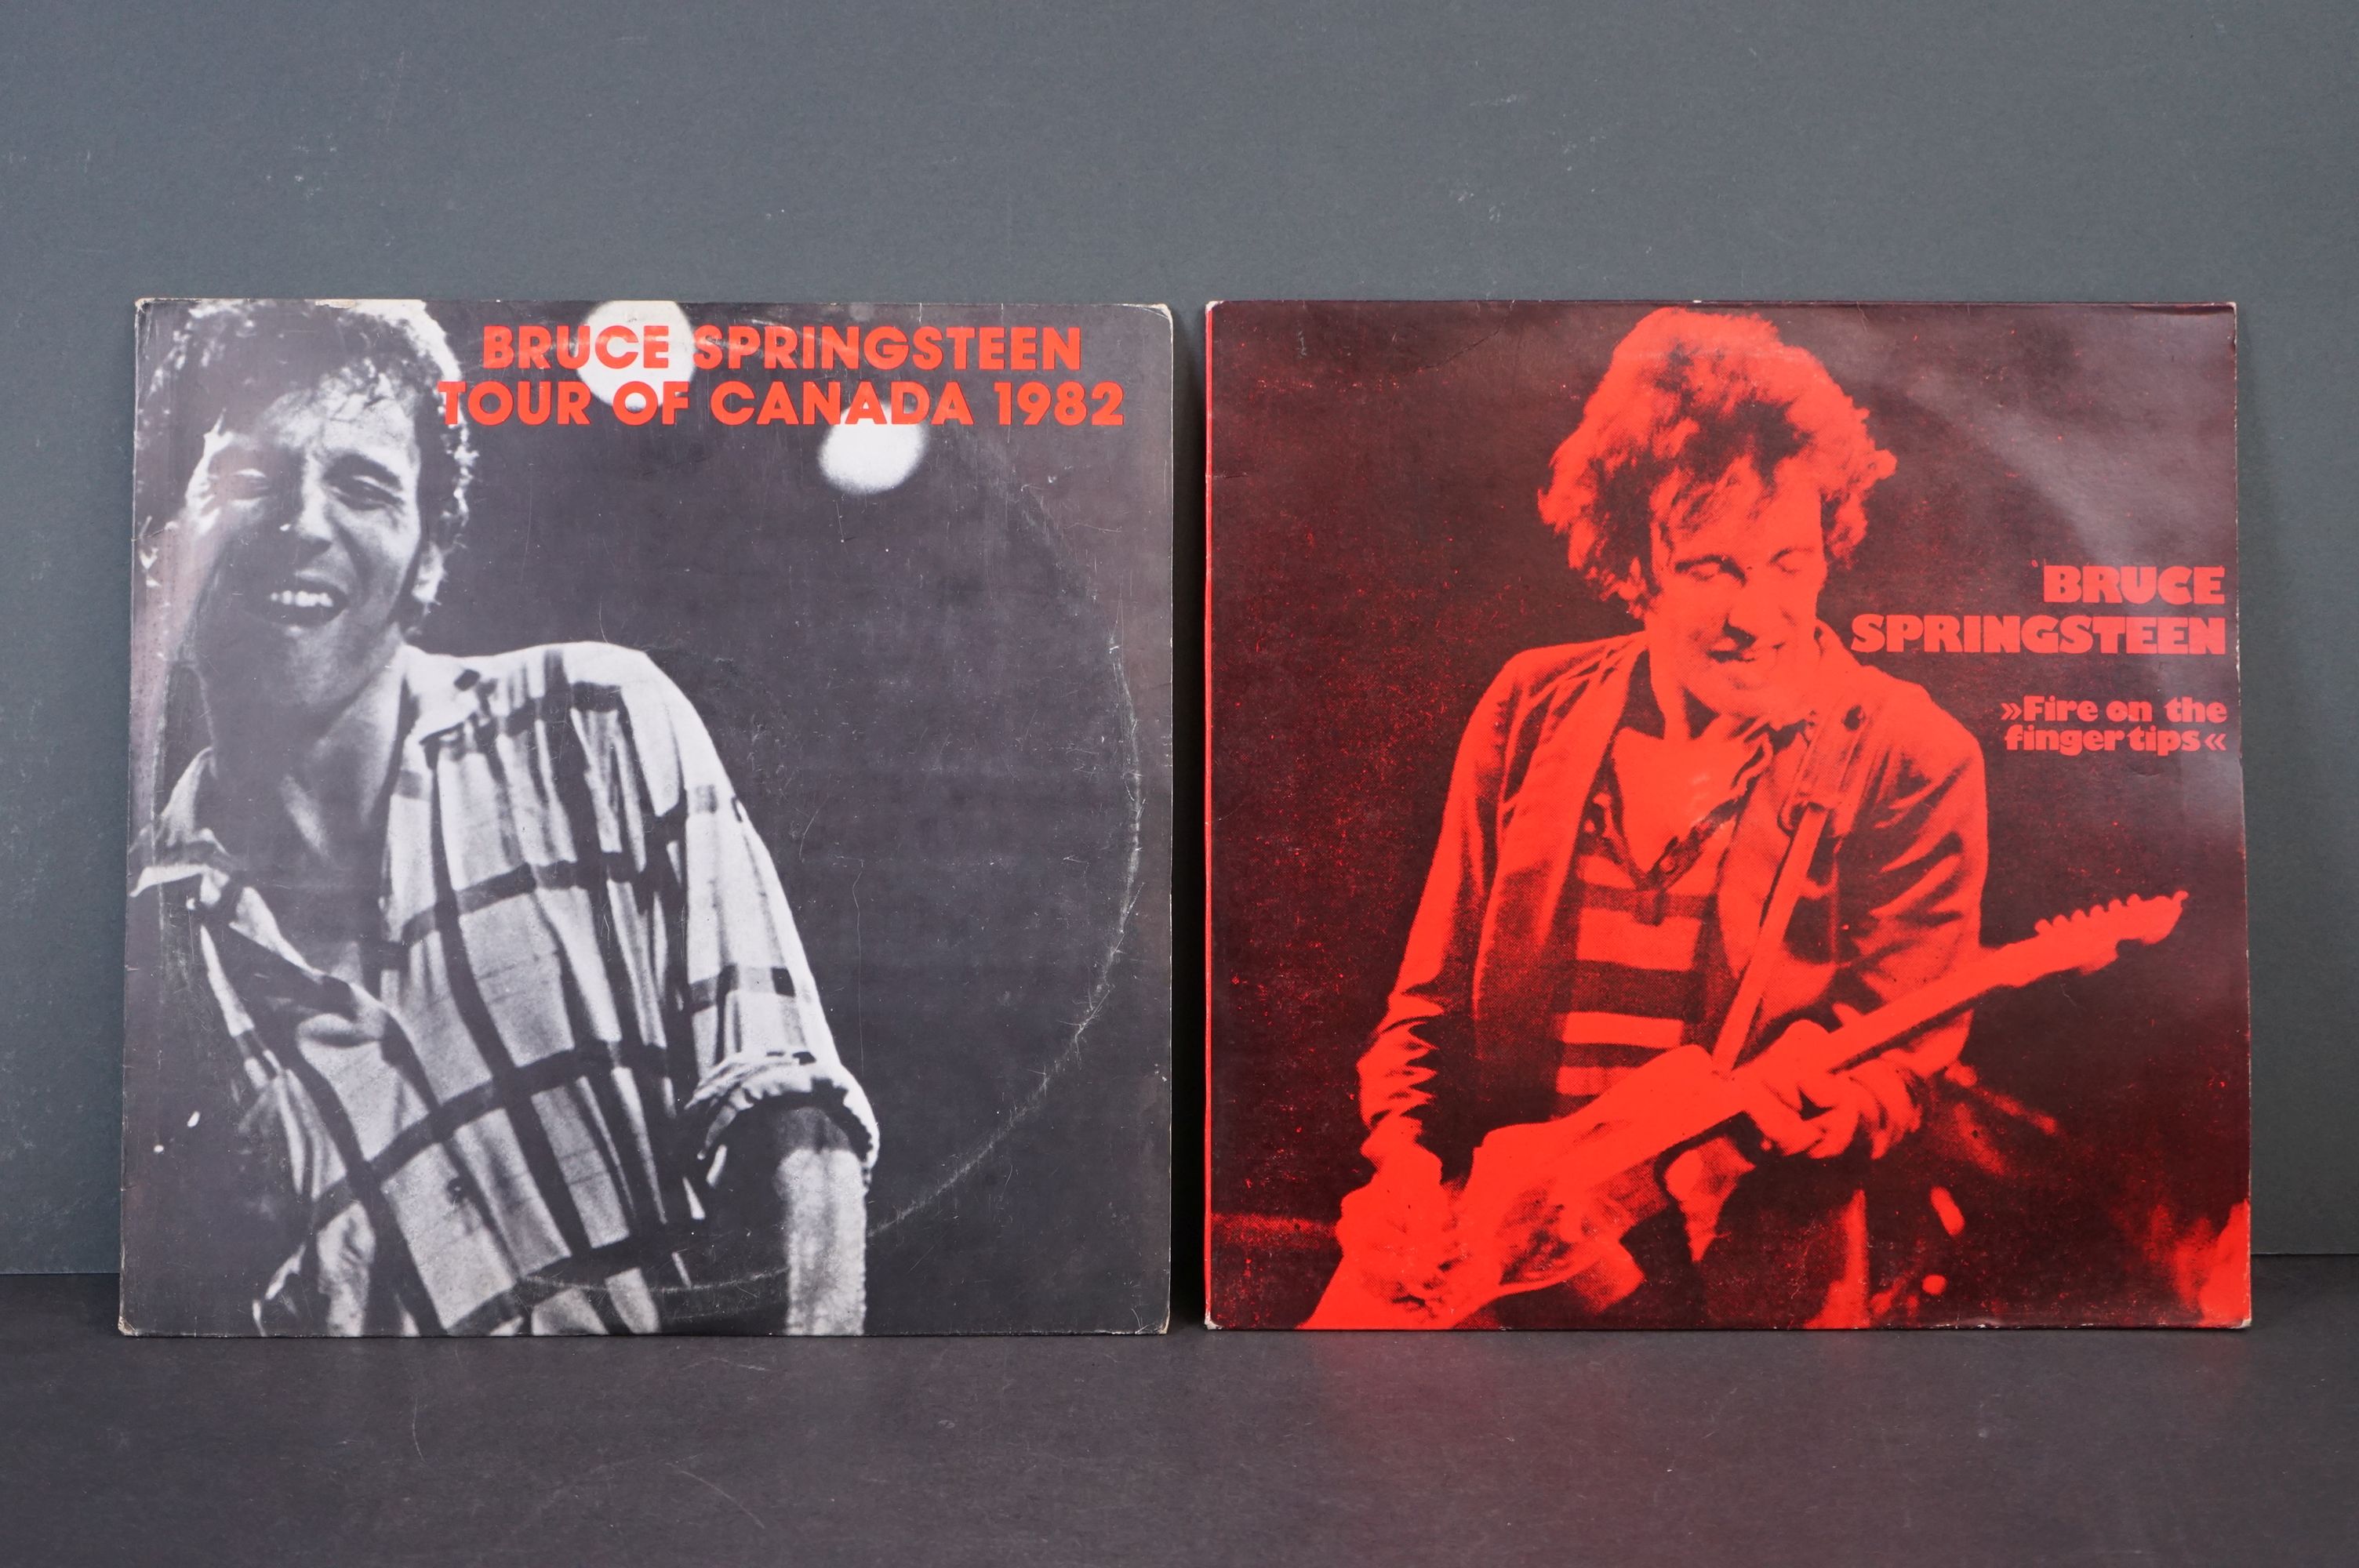 Vinyl - Bruce Springsteen - 2 Rare Private Pressing Live albums: ?Fire On The Finger Tips? 1978,